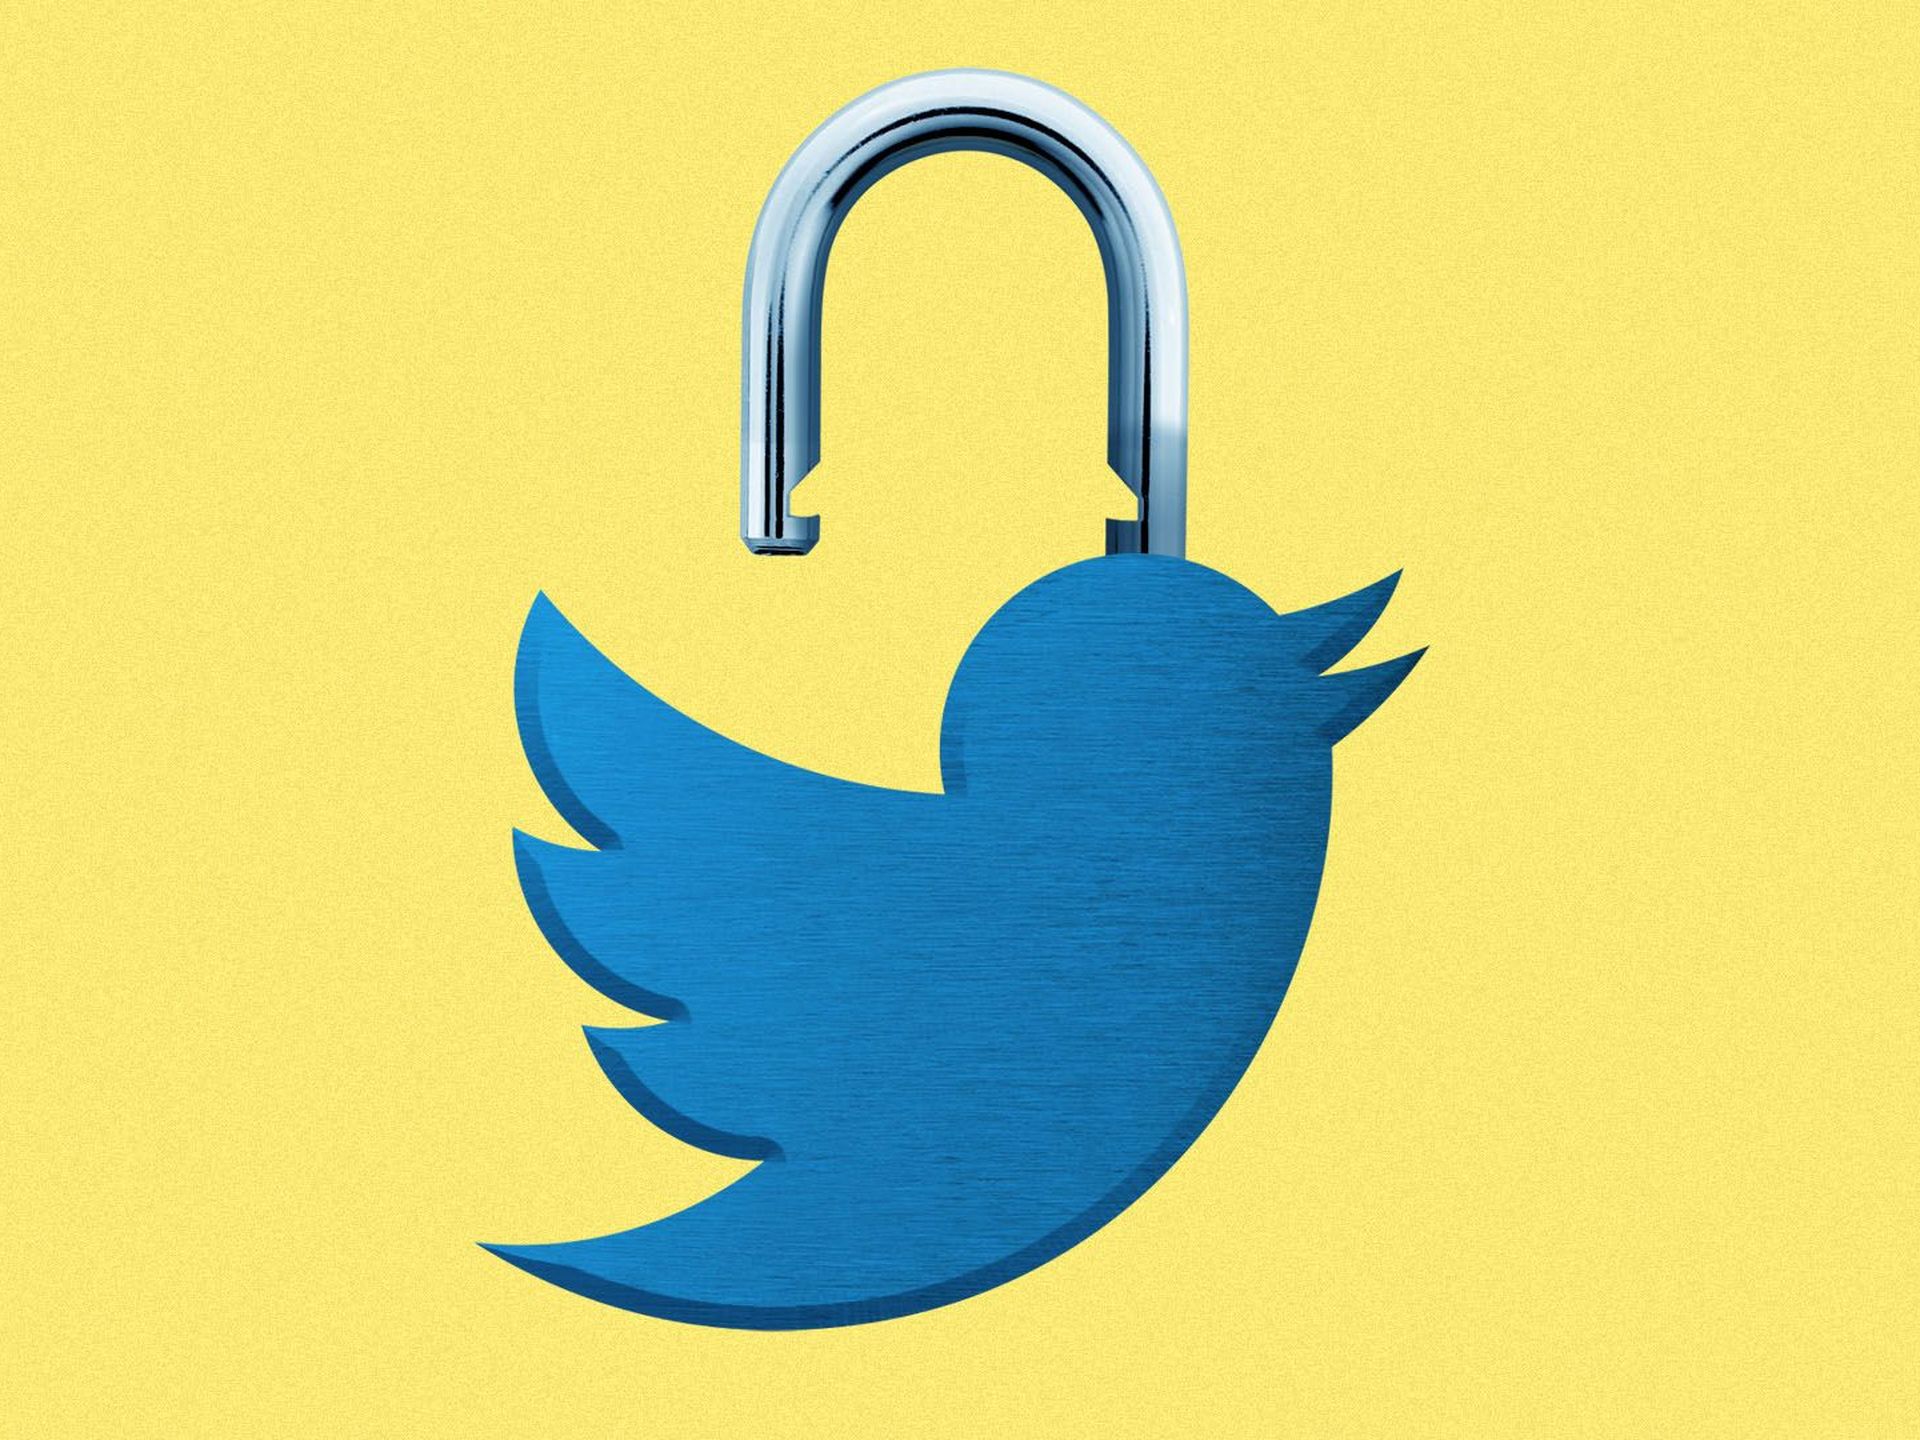 Twitter will limit 2FA options. What does this mean for users? : NPR